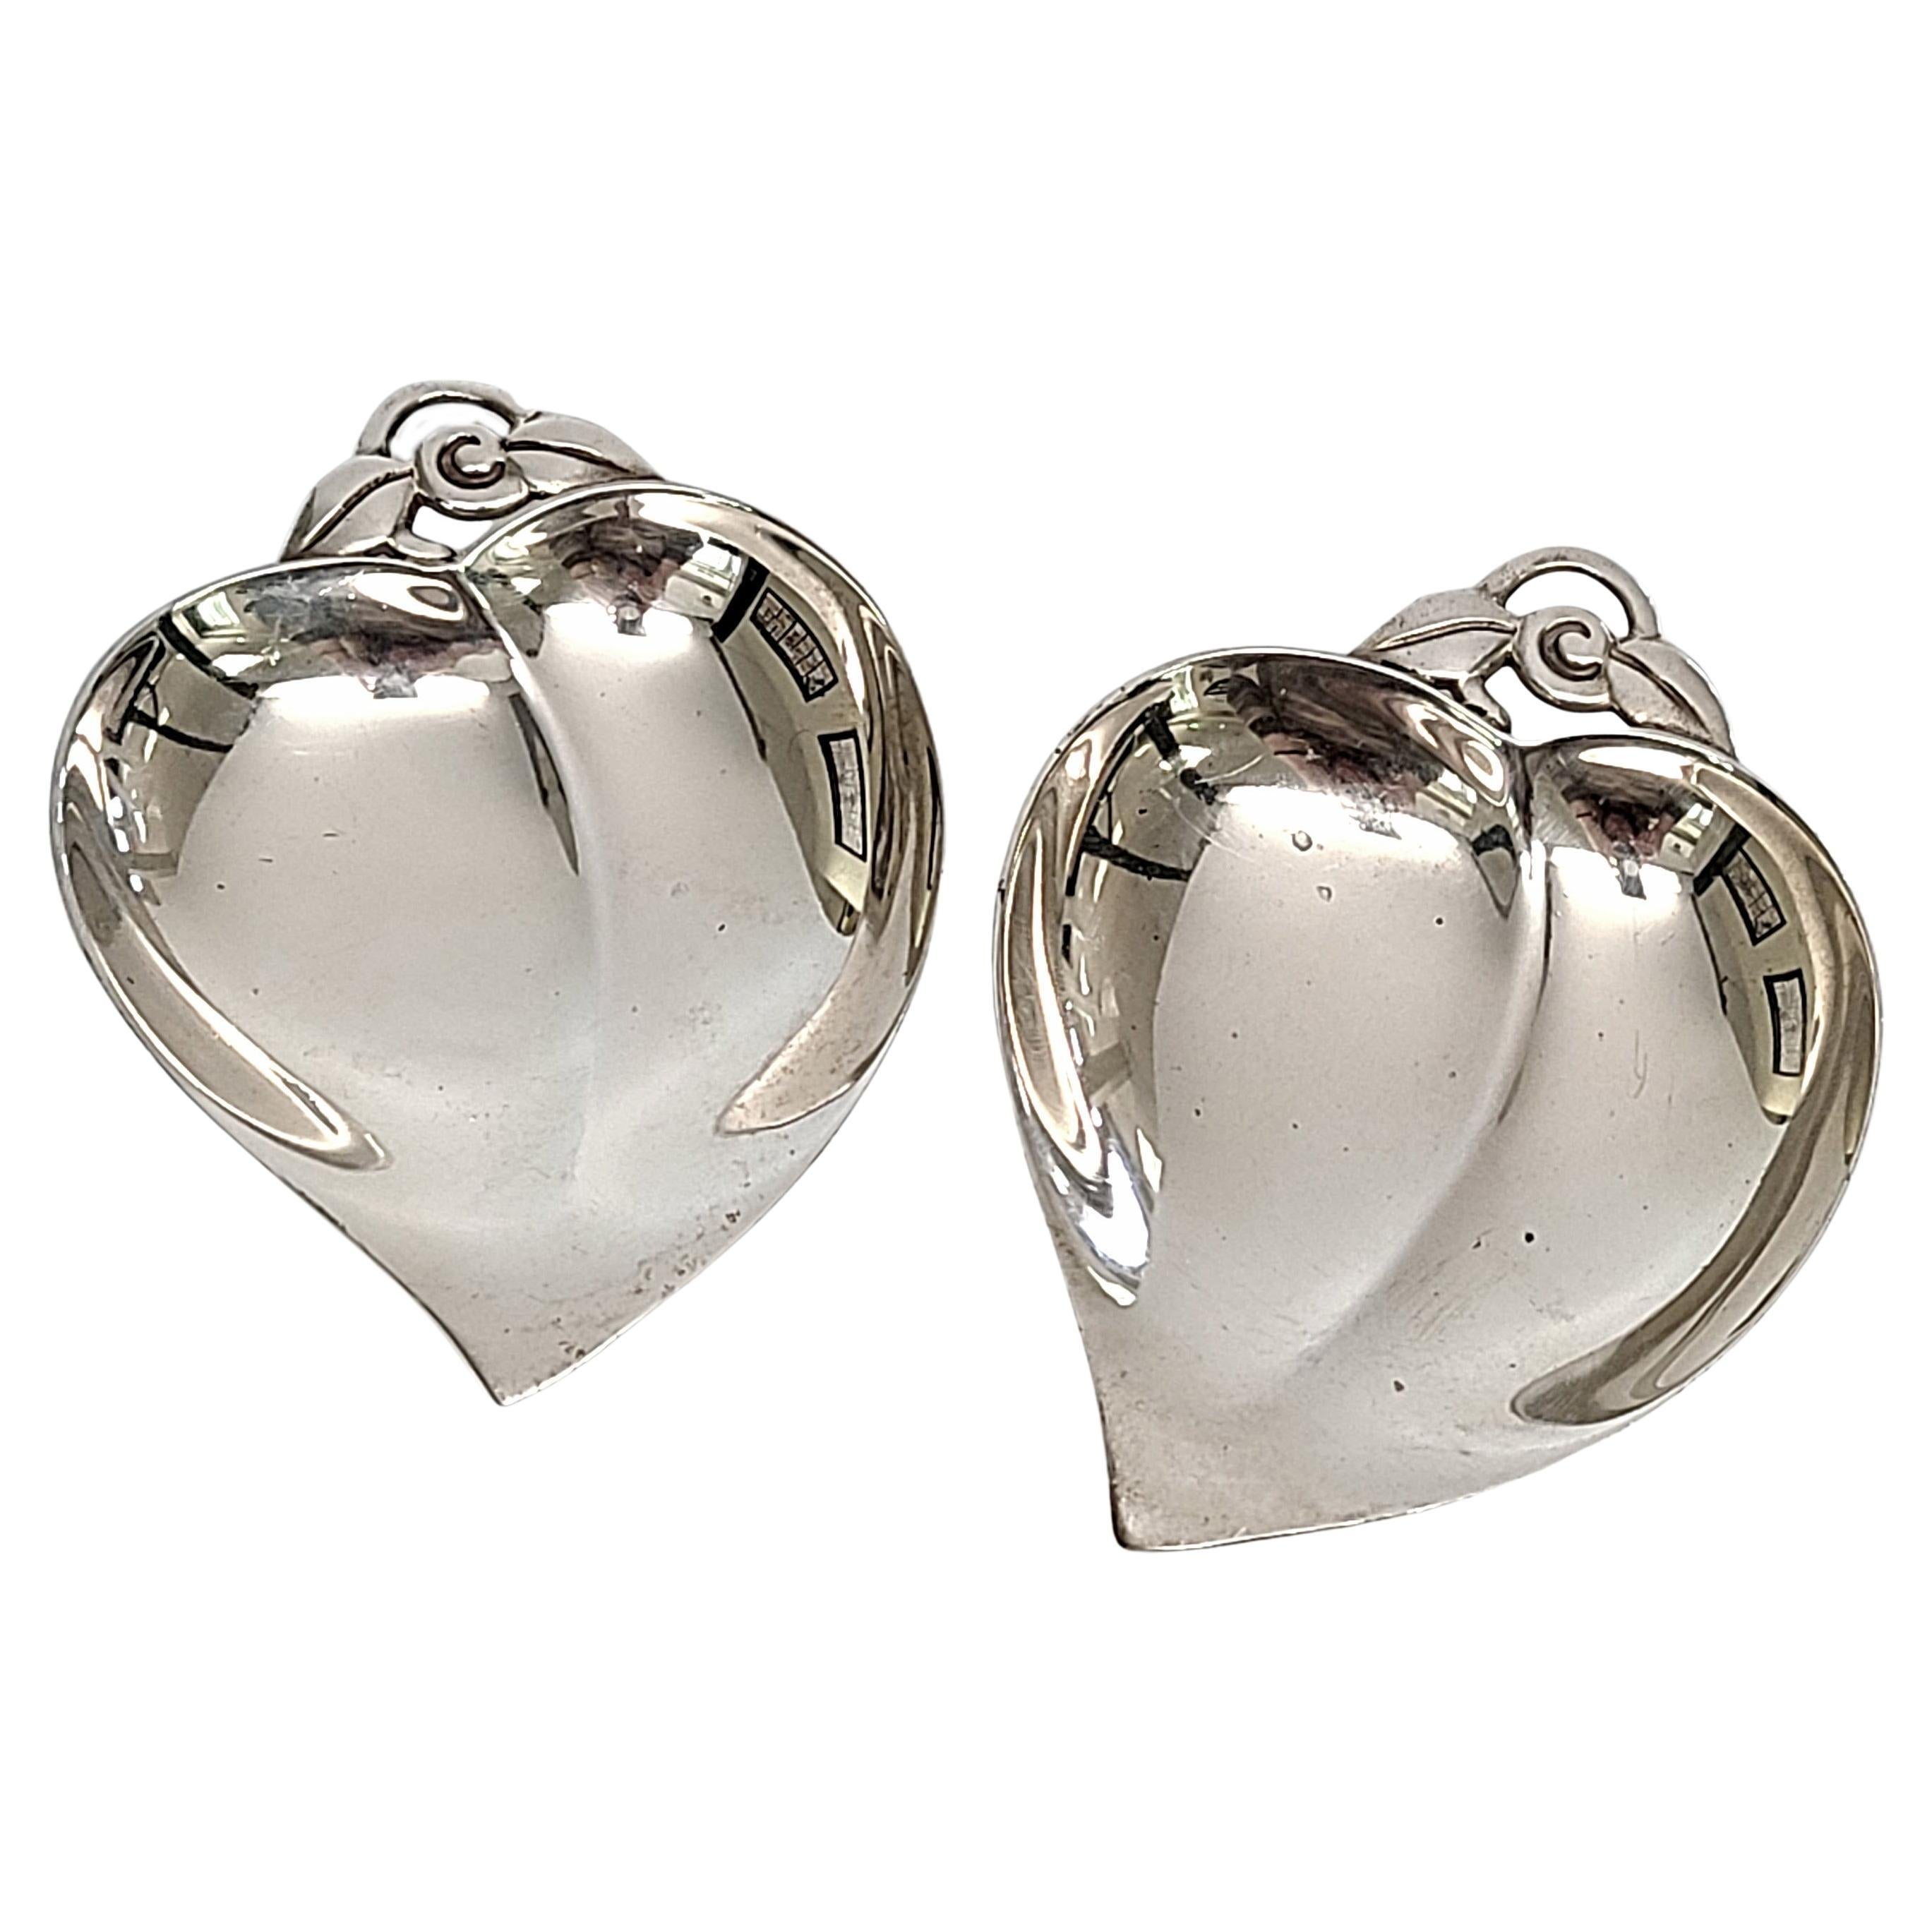 Set of 2 Tiffany & Co. Sterling Silver Heart/Apple Shaped Dishes